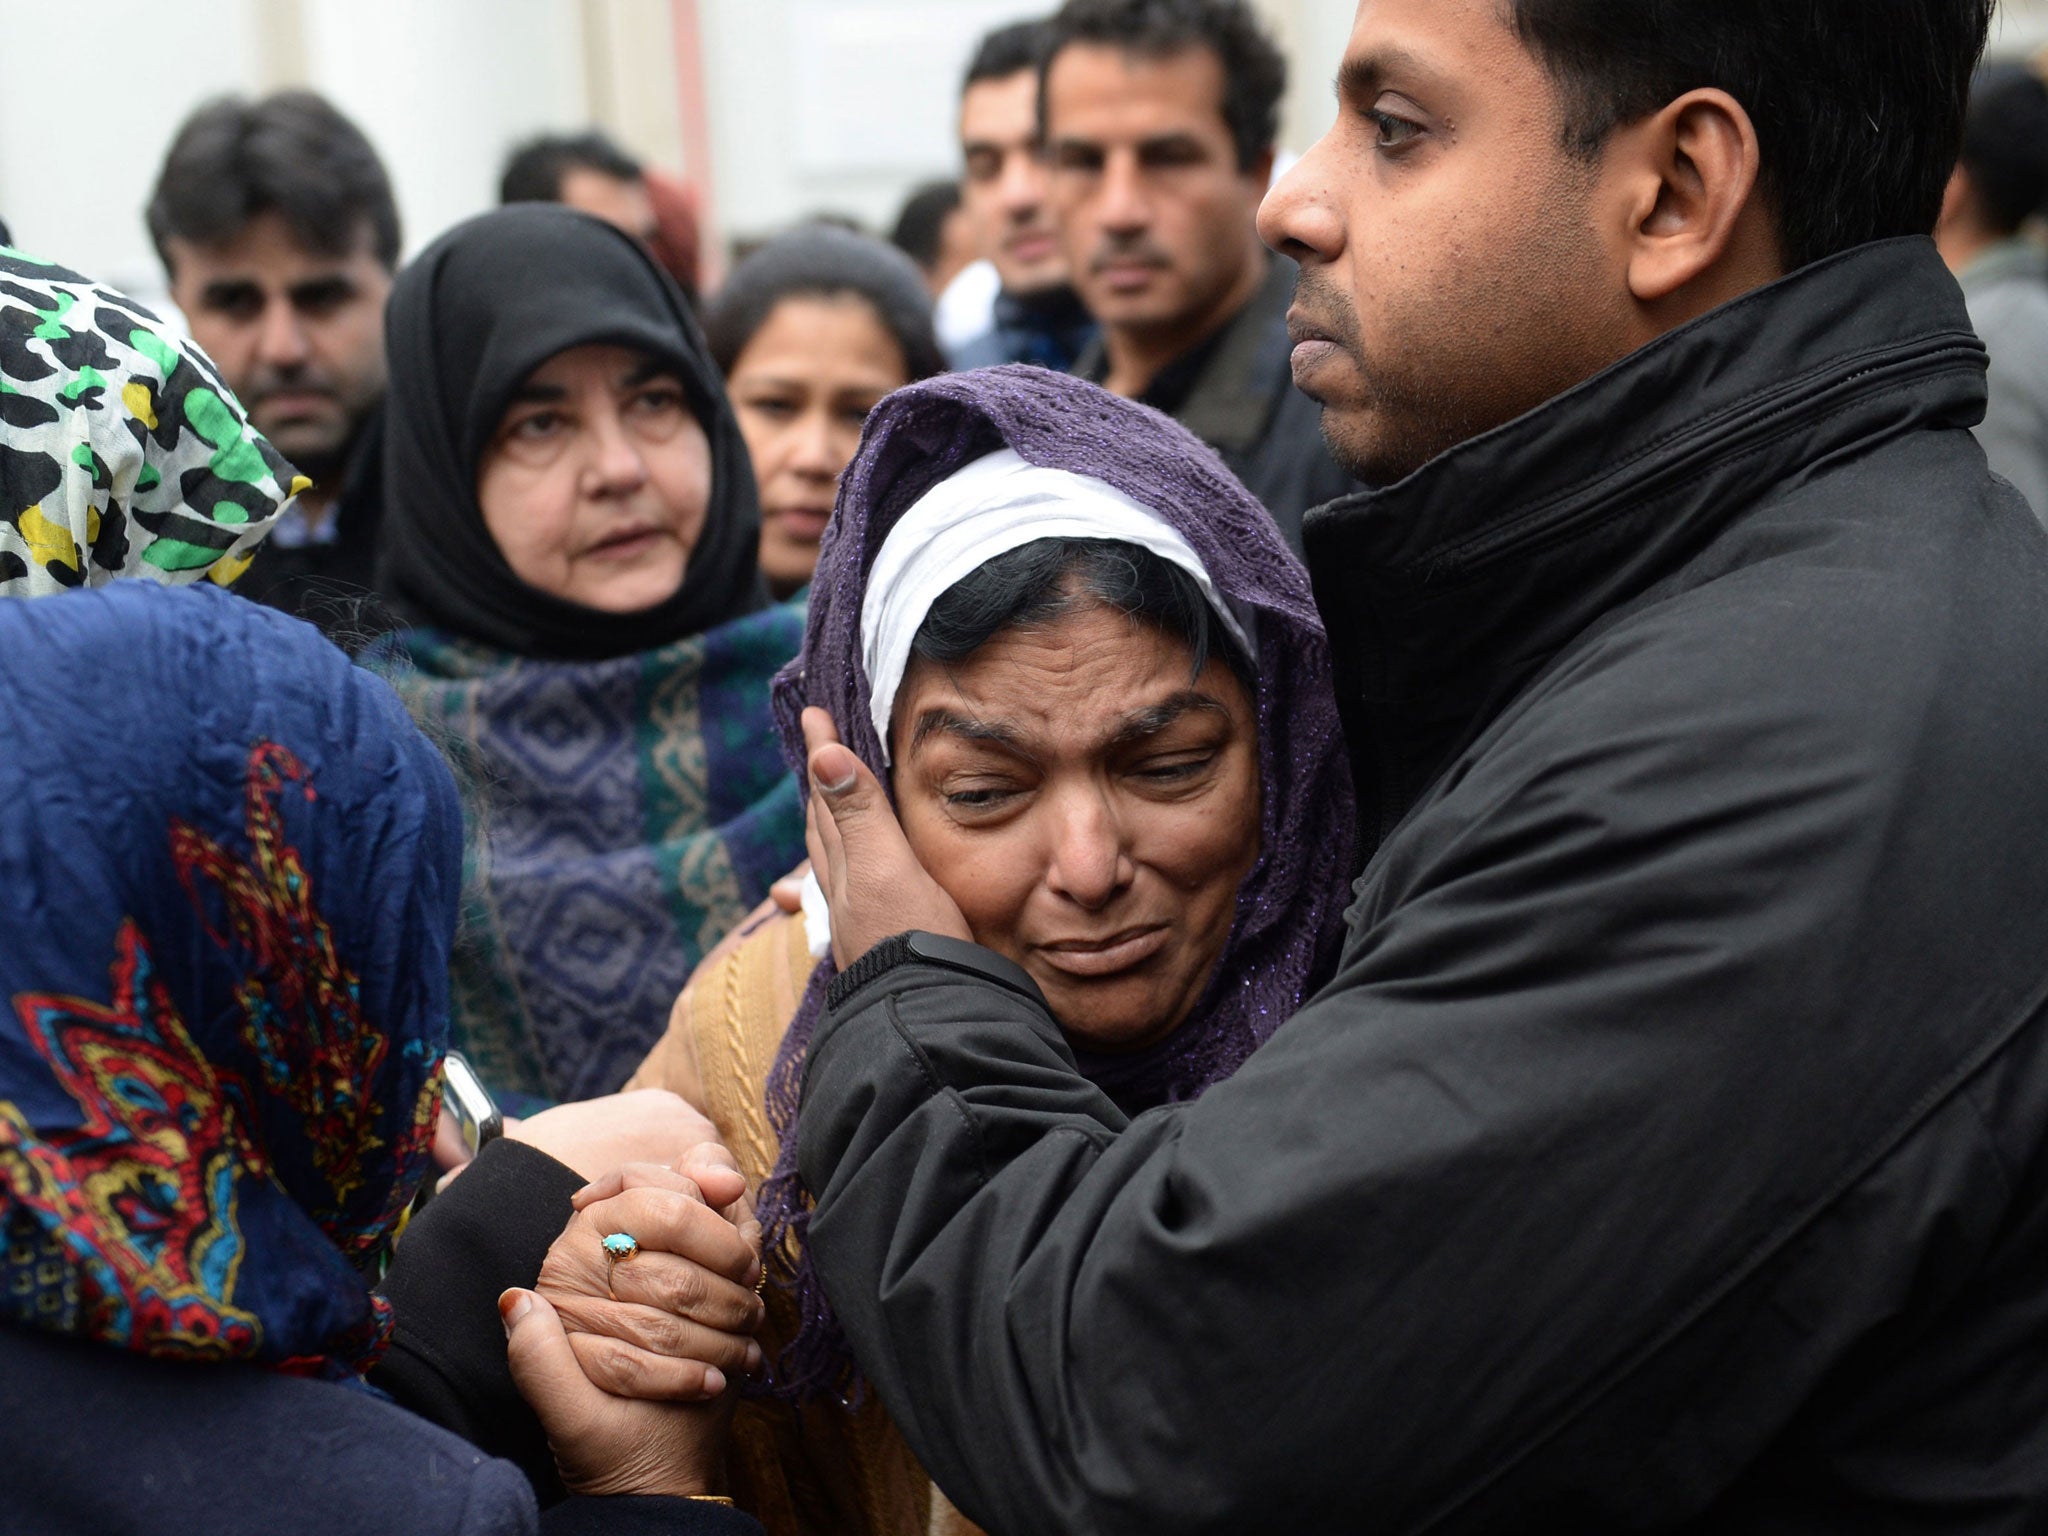 Fatima Khan, mother of Abbas Khan, is comforted by her son